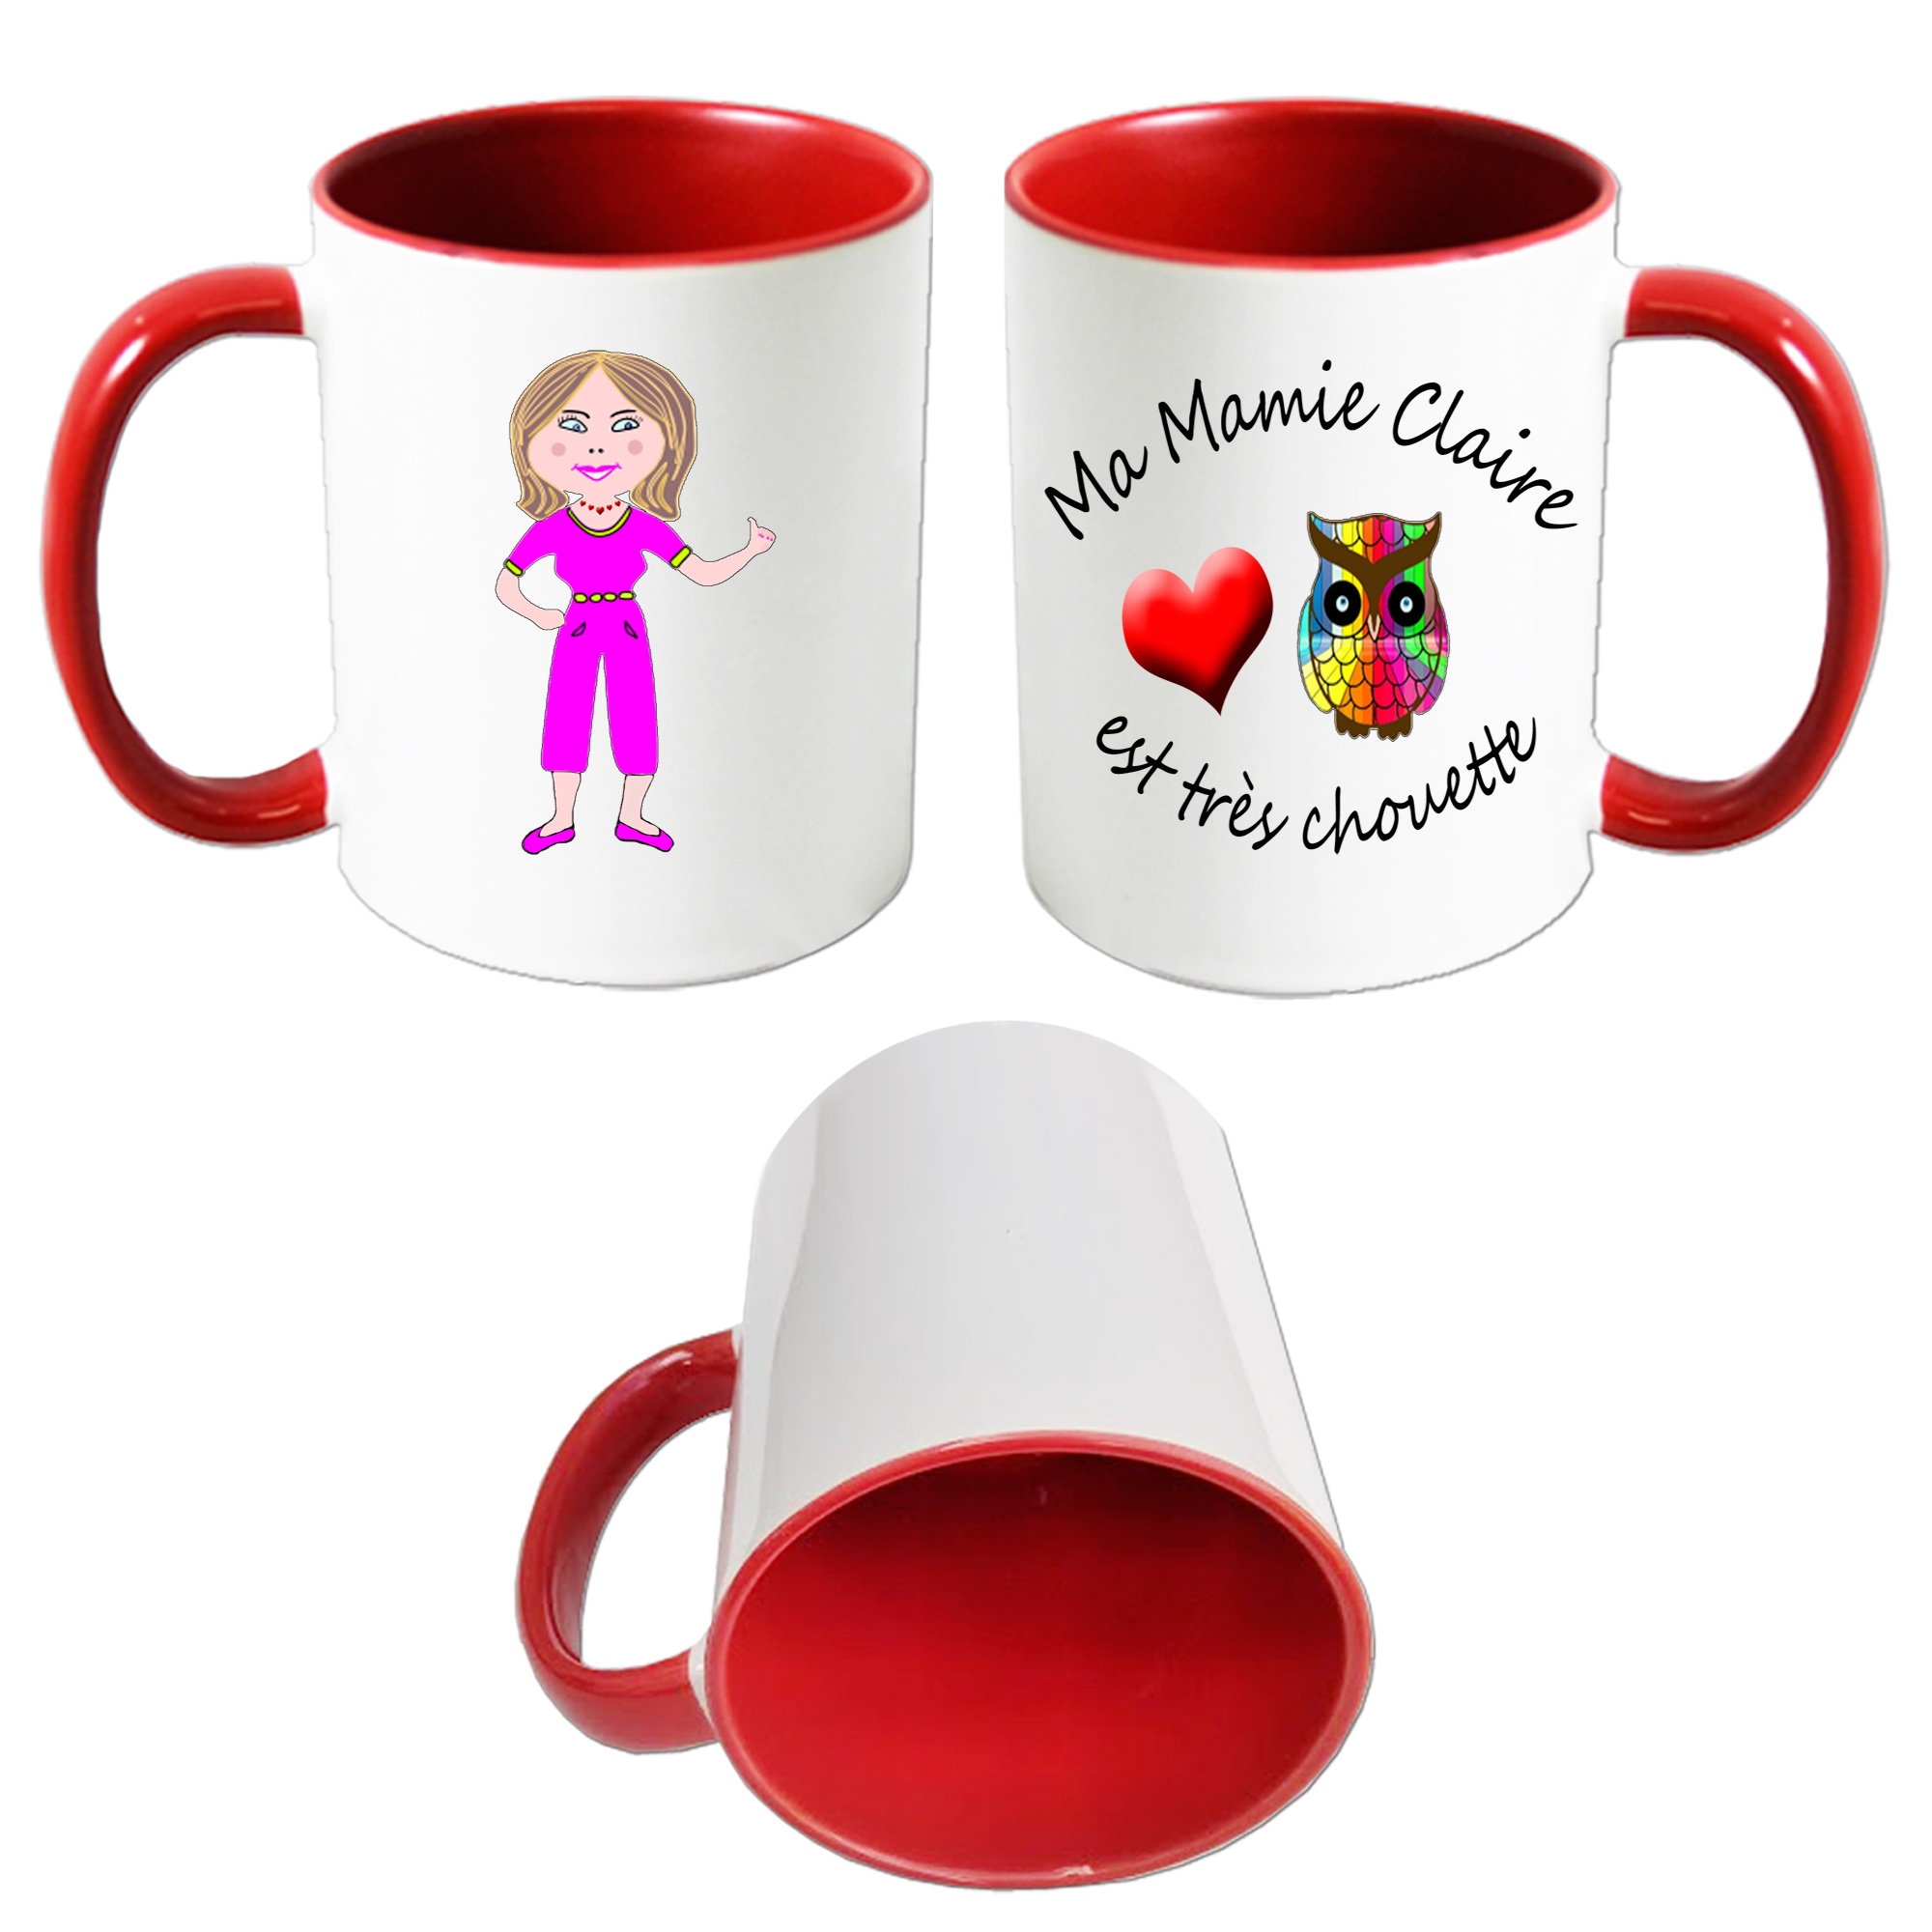 famille-ma-mamie-chouette-mug-personnalisable-rouge-claire